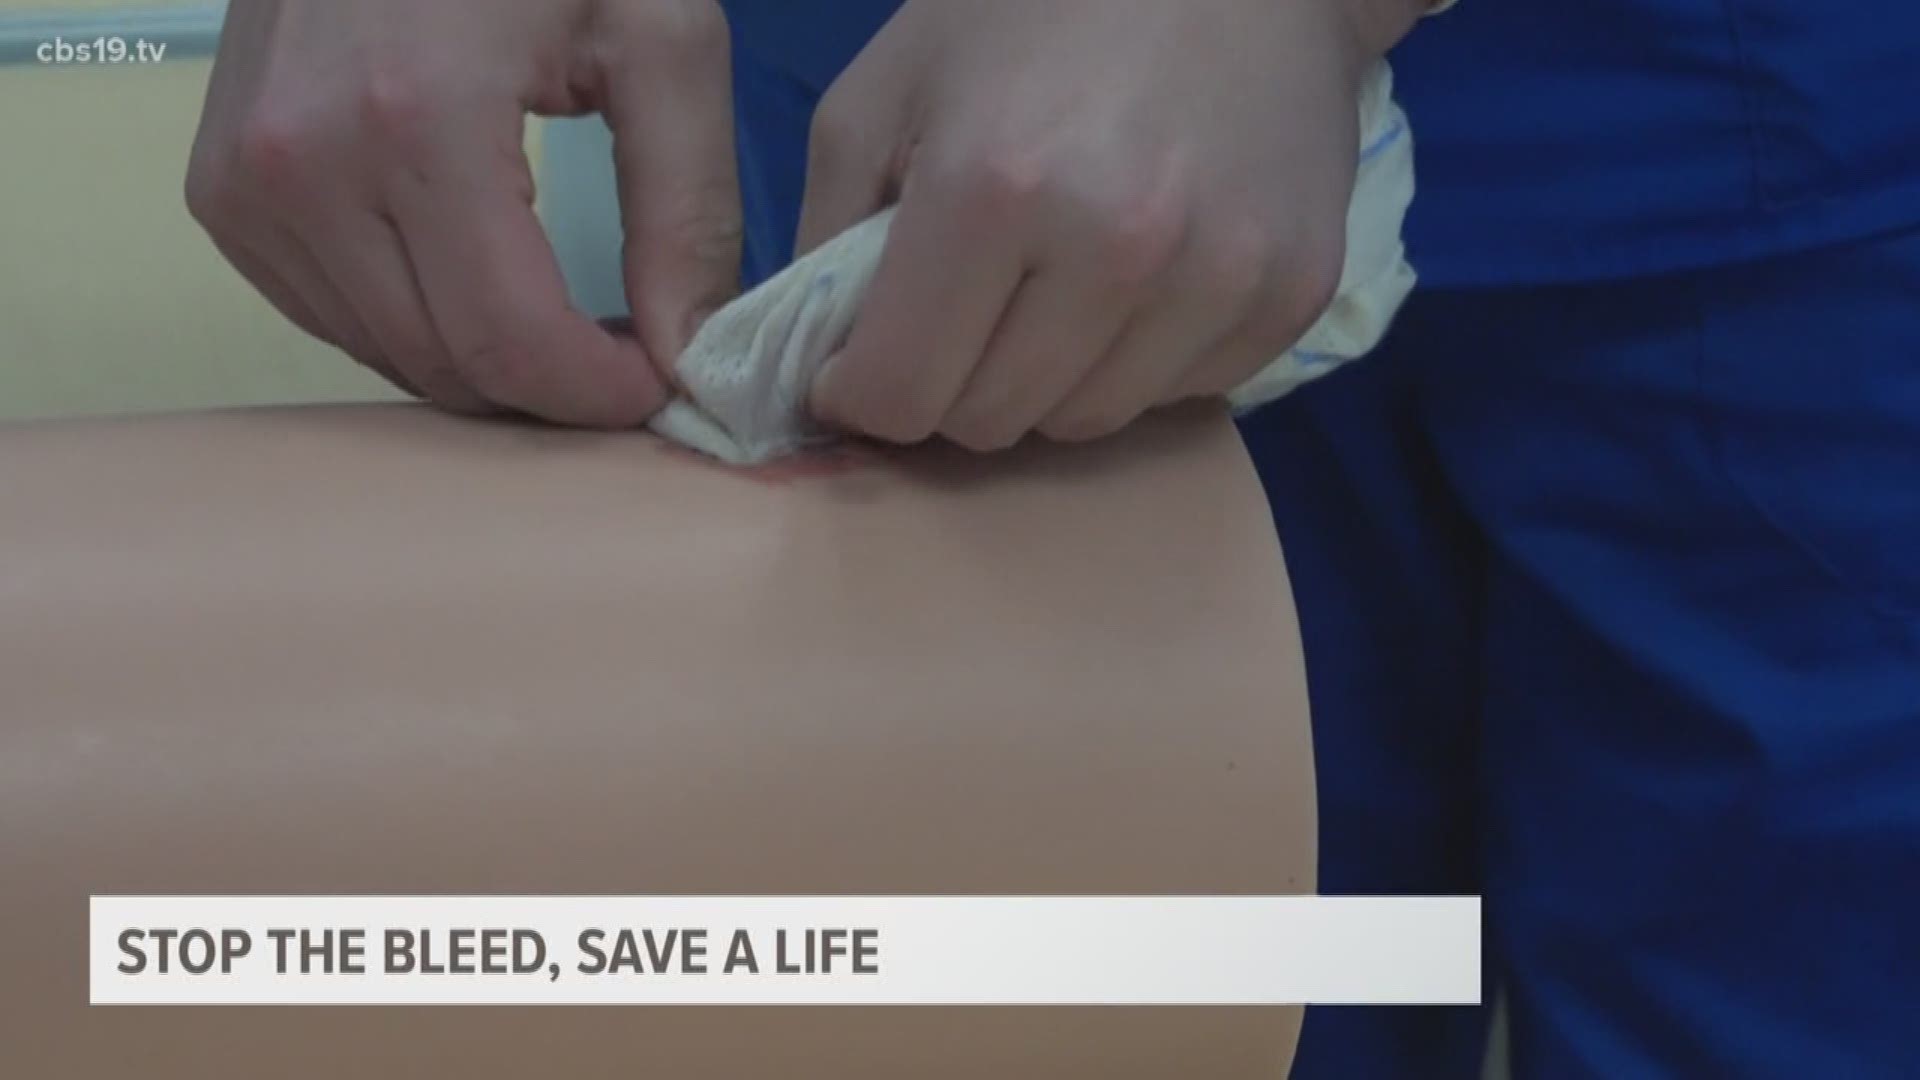 Stop the bleed, save a life